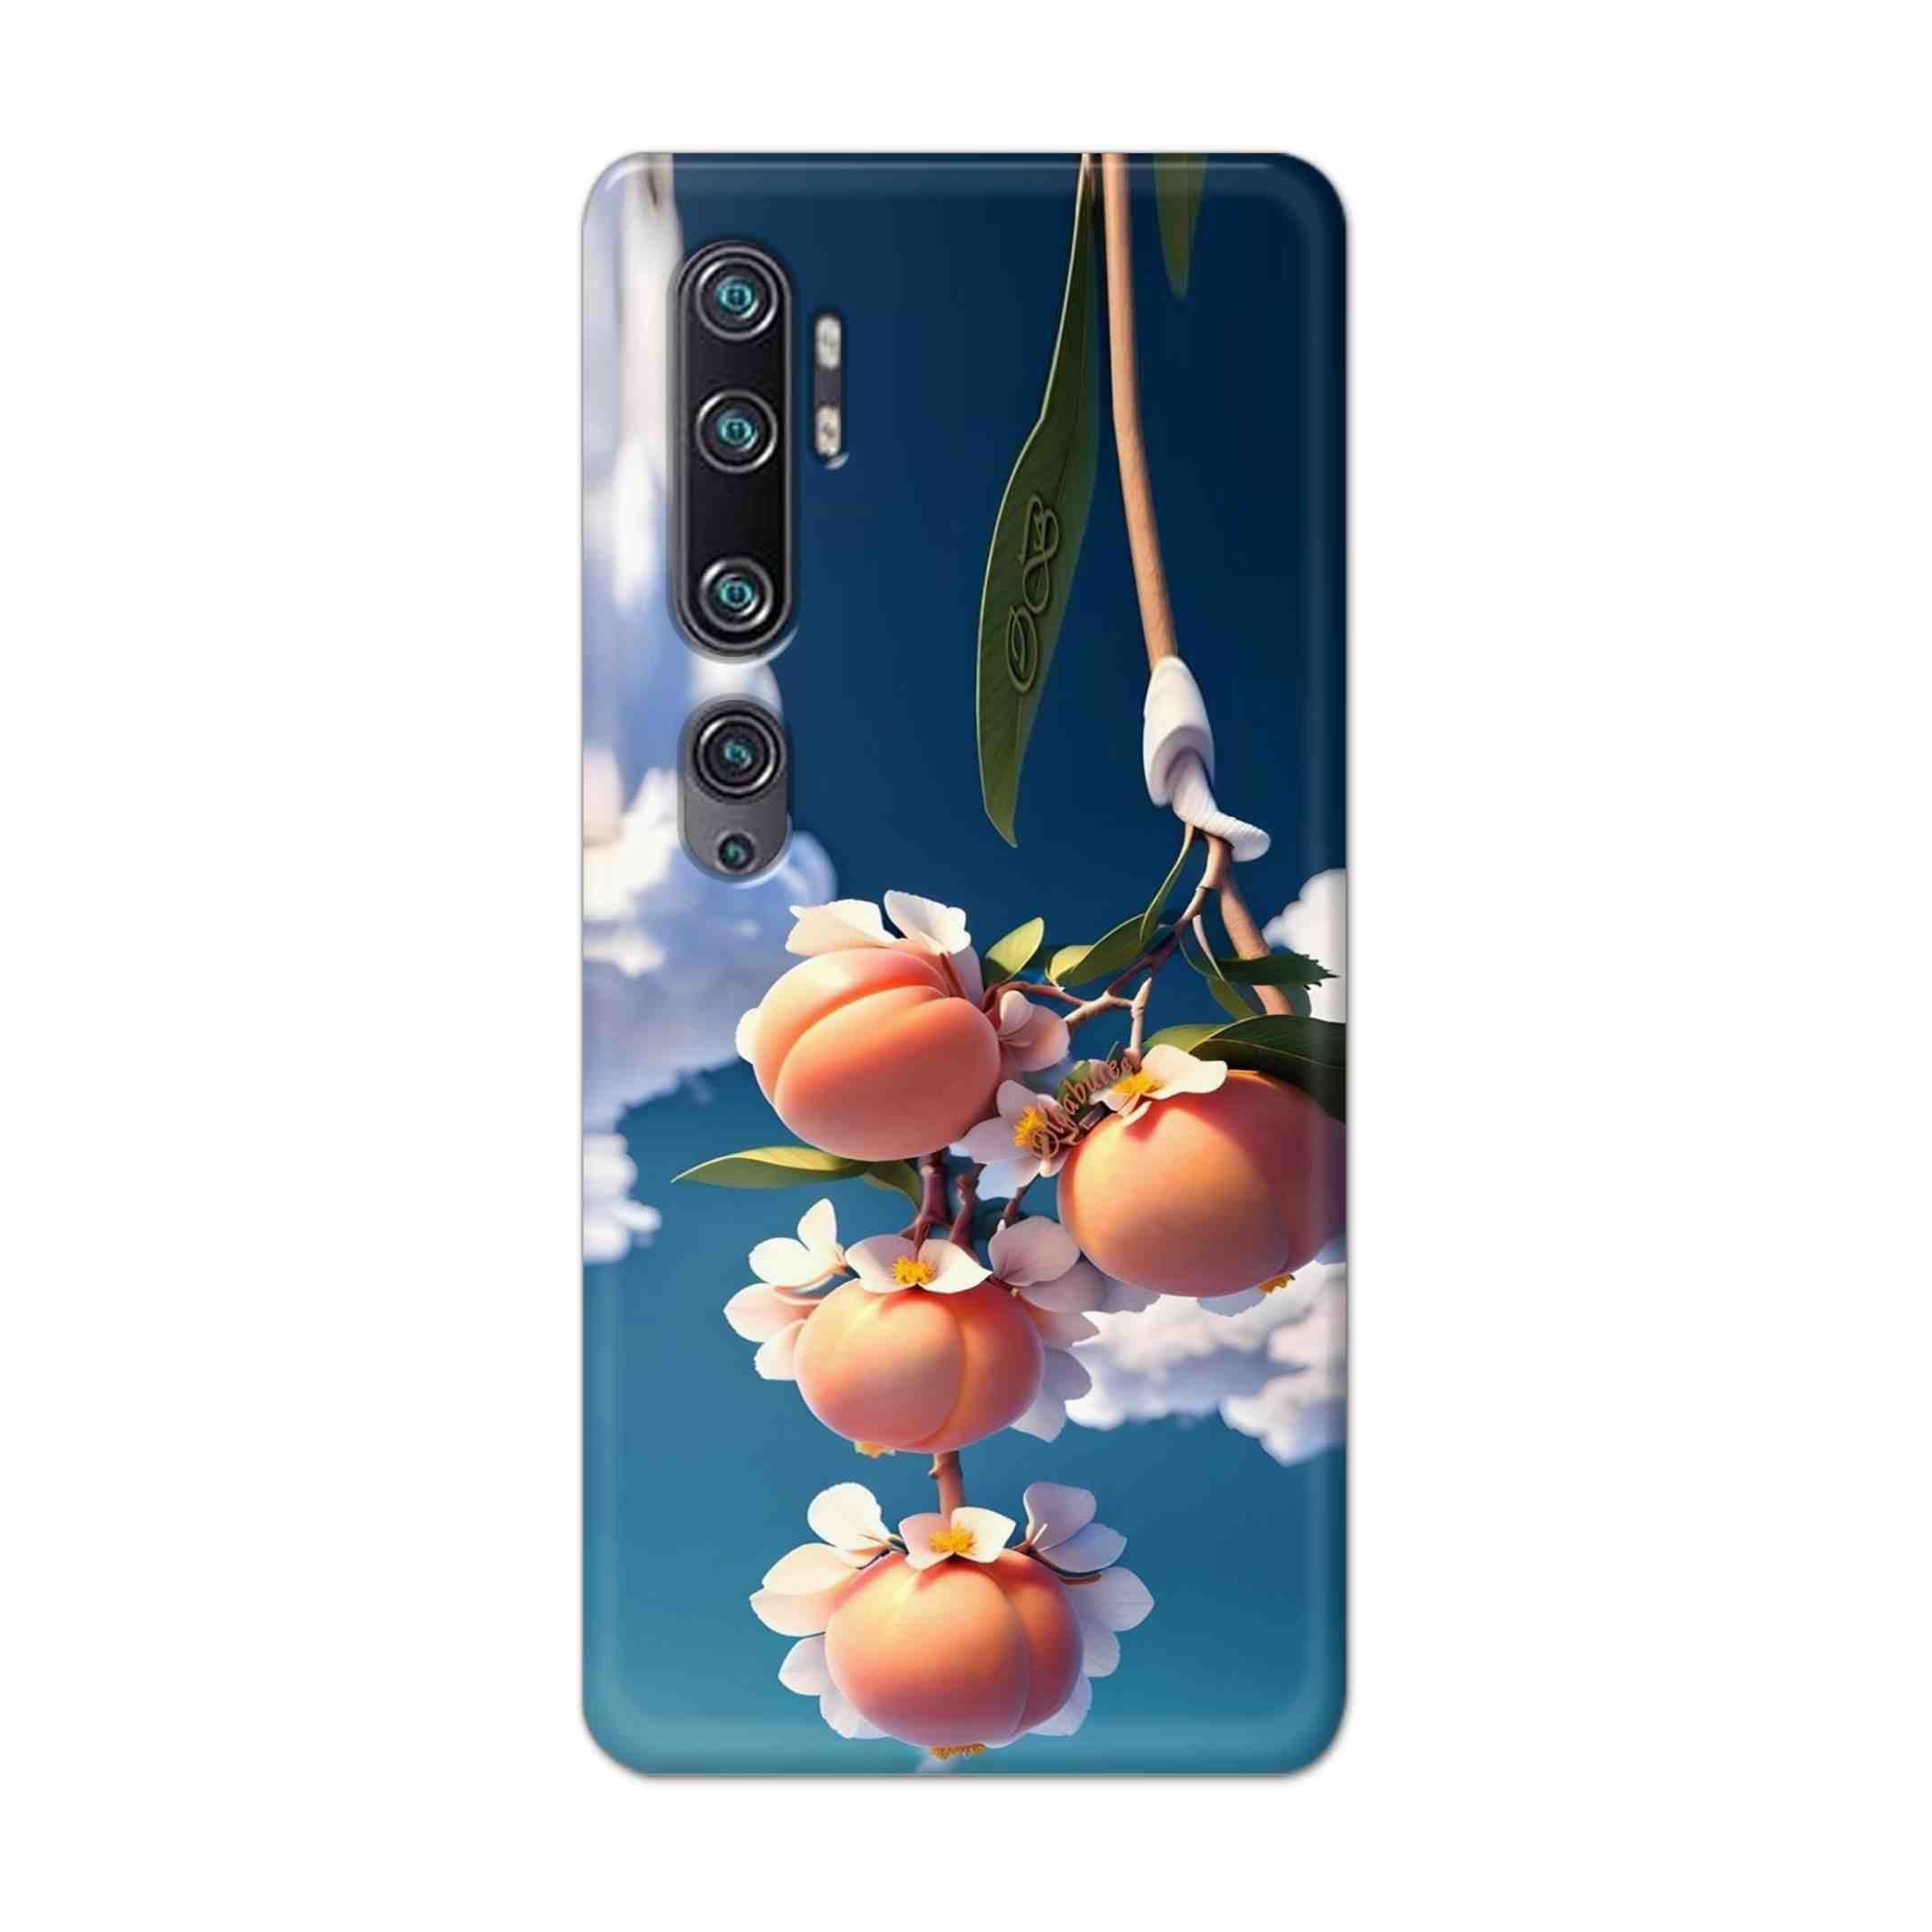 Buy Fruit Hard Back Mobile Phone Case Cover For Xiaomi Mi Note 10 Online